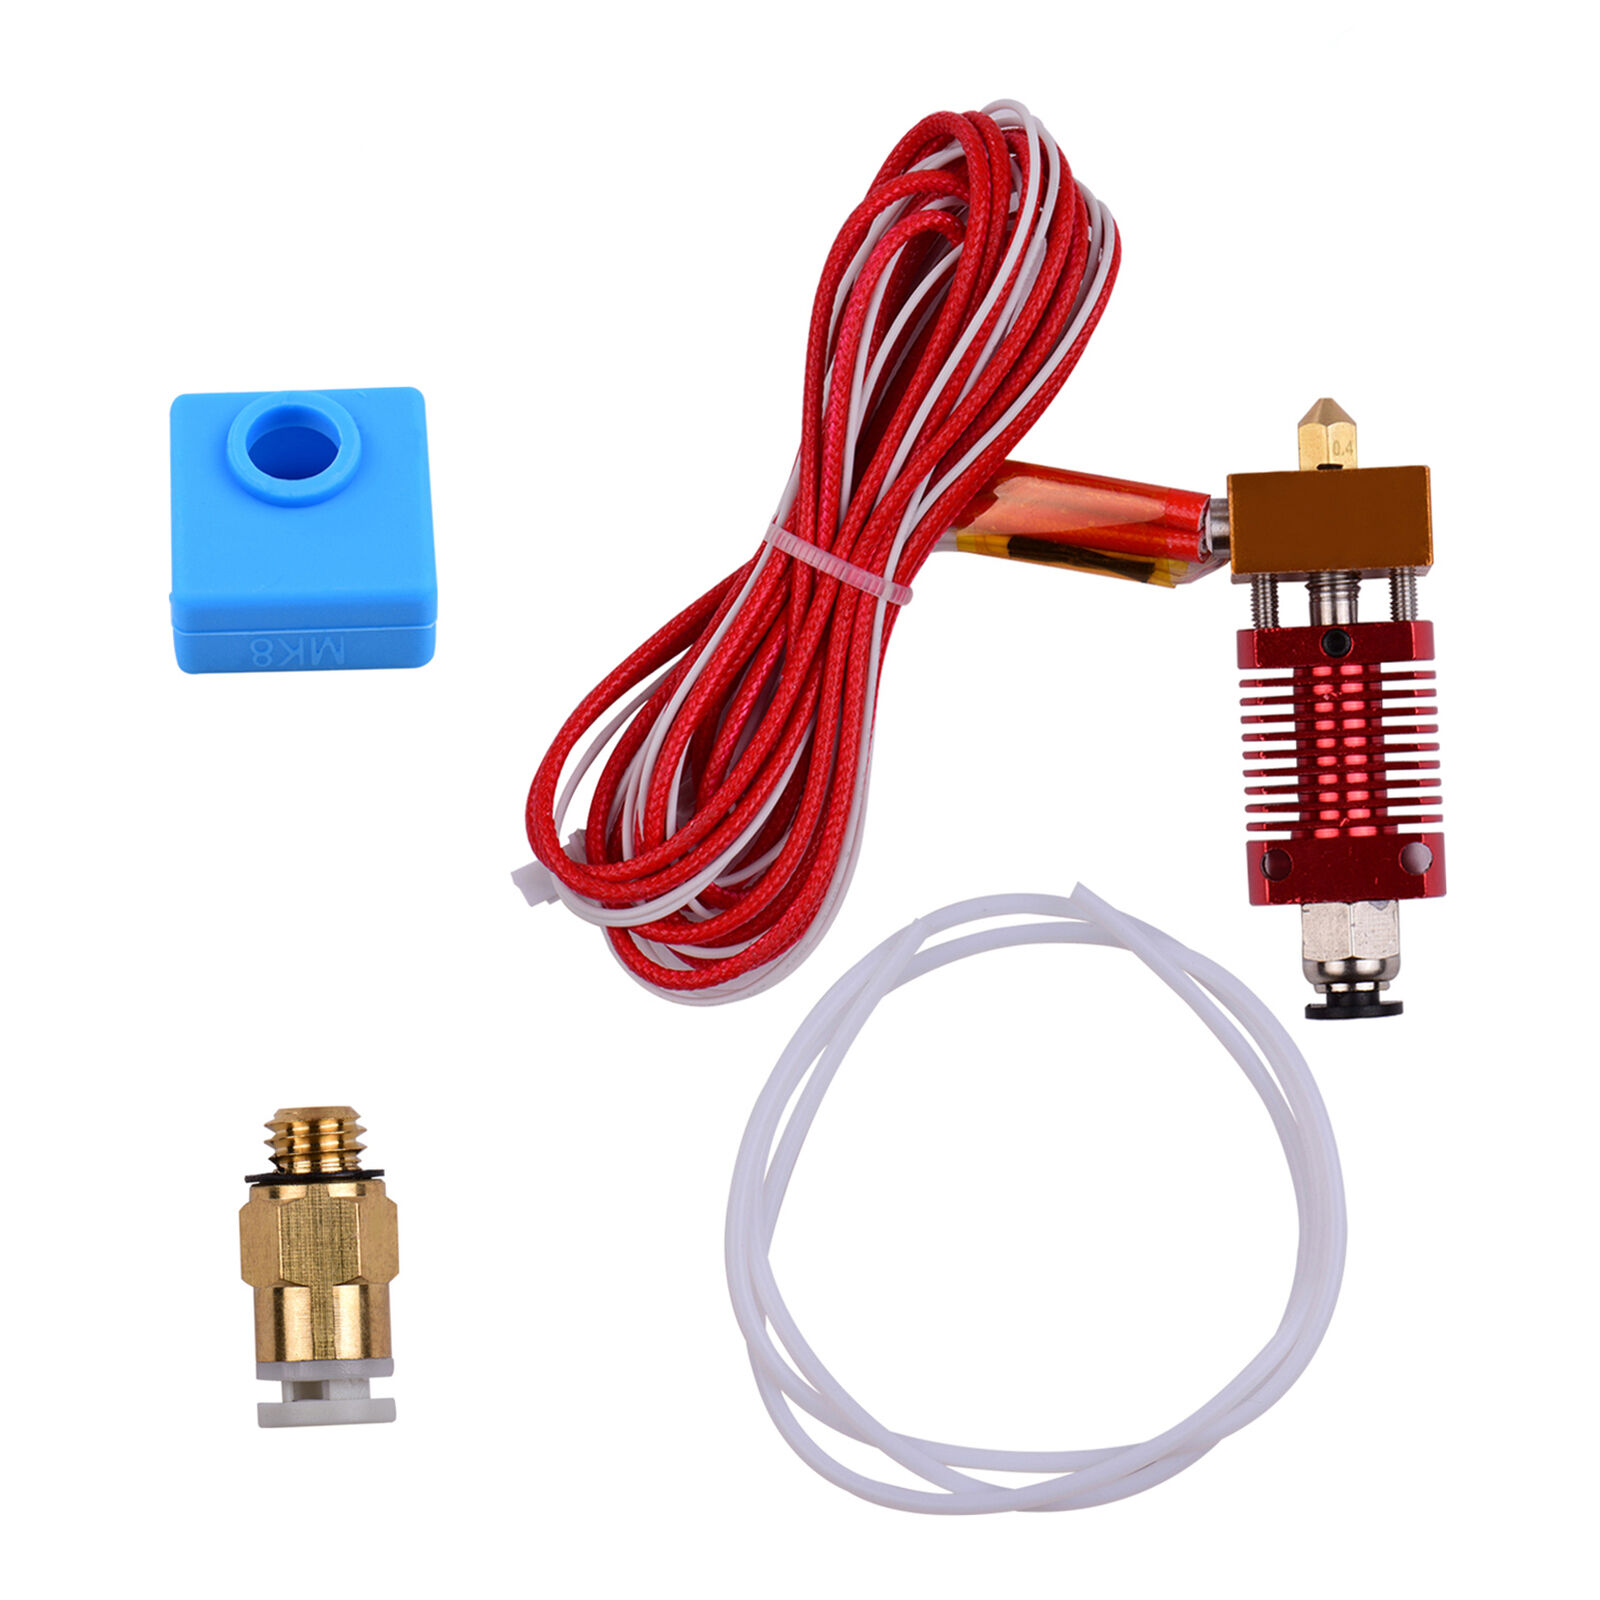 Metal Hotend Extruder Kit with 0.4mm Nozzle  Heating Block Silicone M5U9